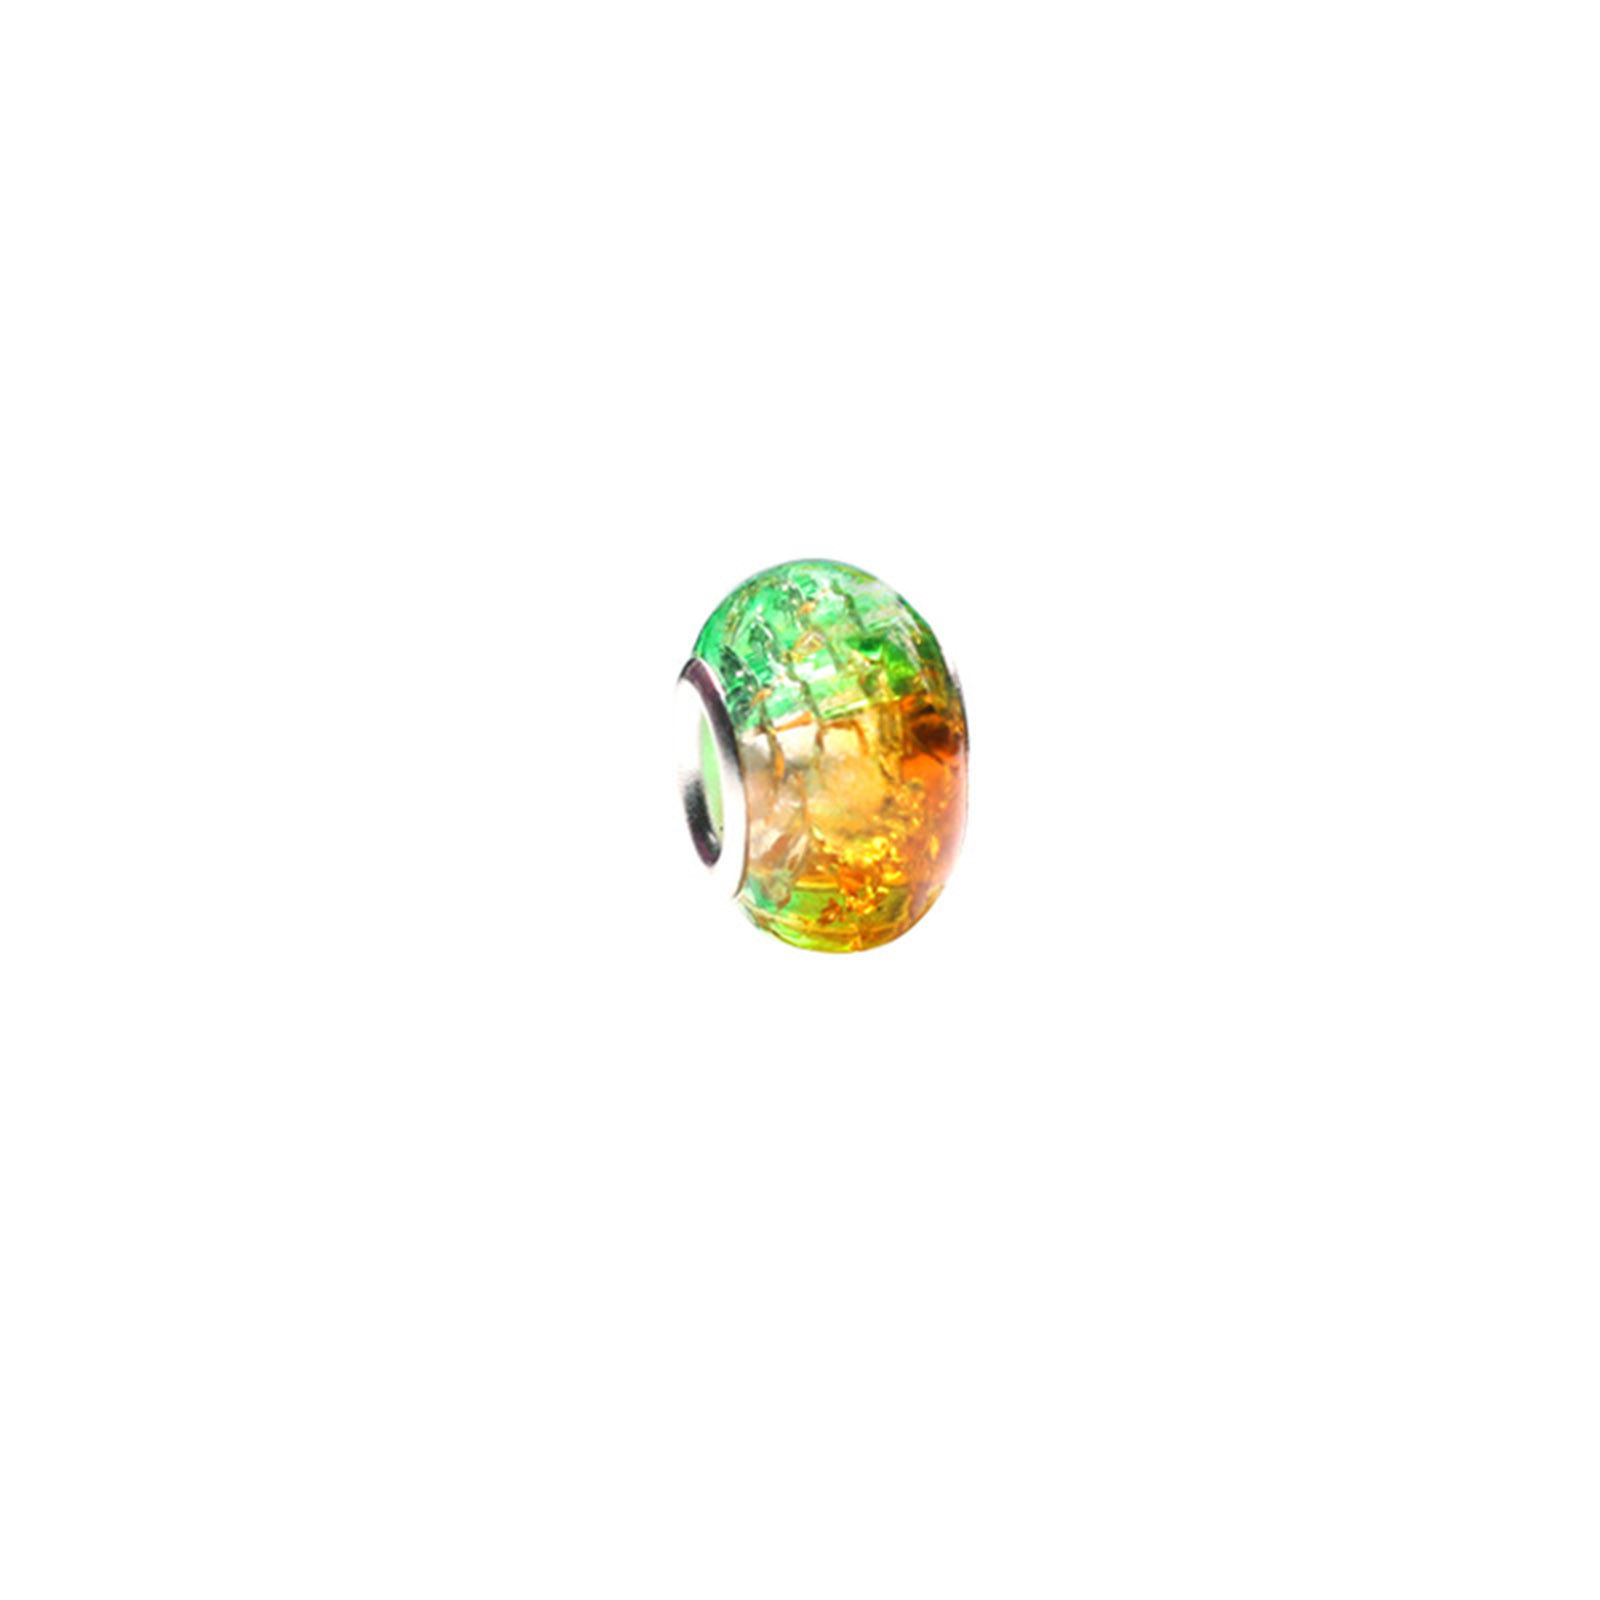 Picture of Resin European Style Large Hole Charm Beads Green & Orange Round Crack Gradient Color 14mm Dia., Hole: Approx 5mm, 20 PCs